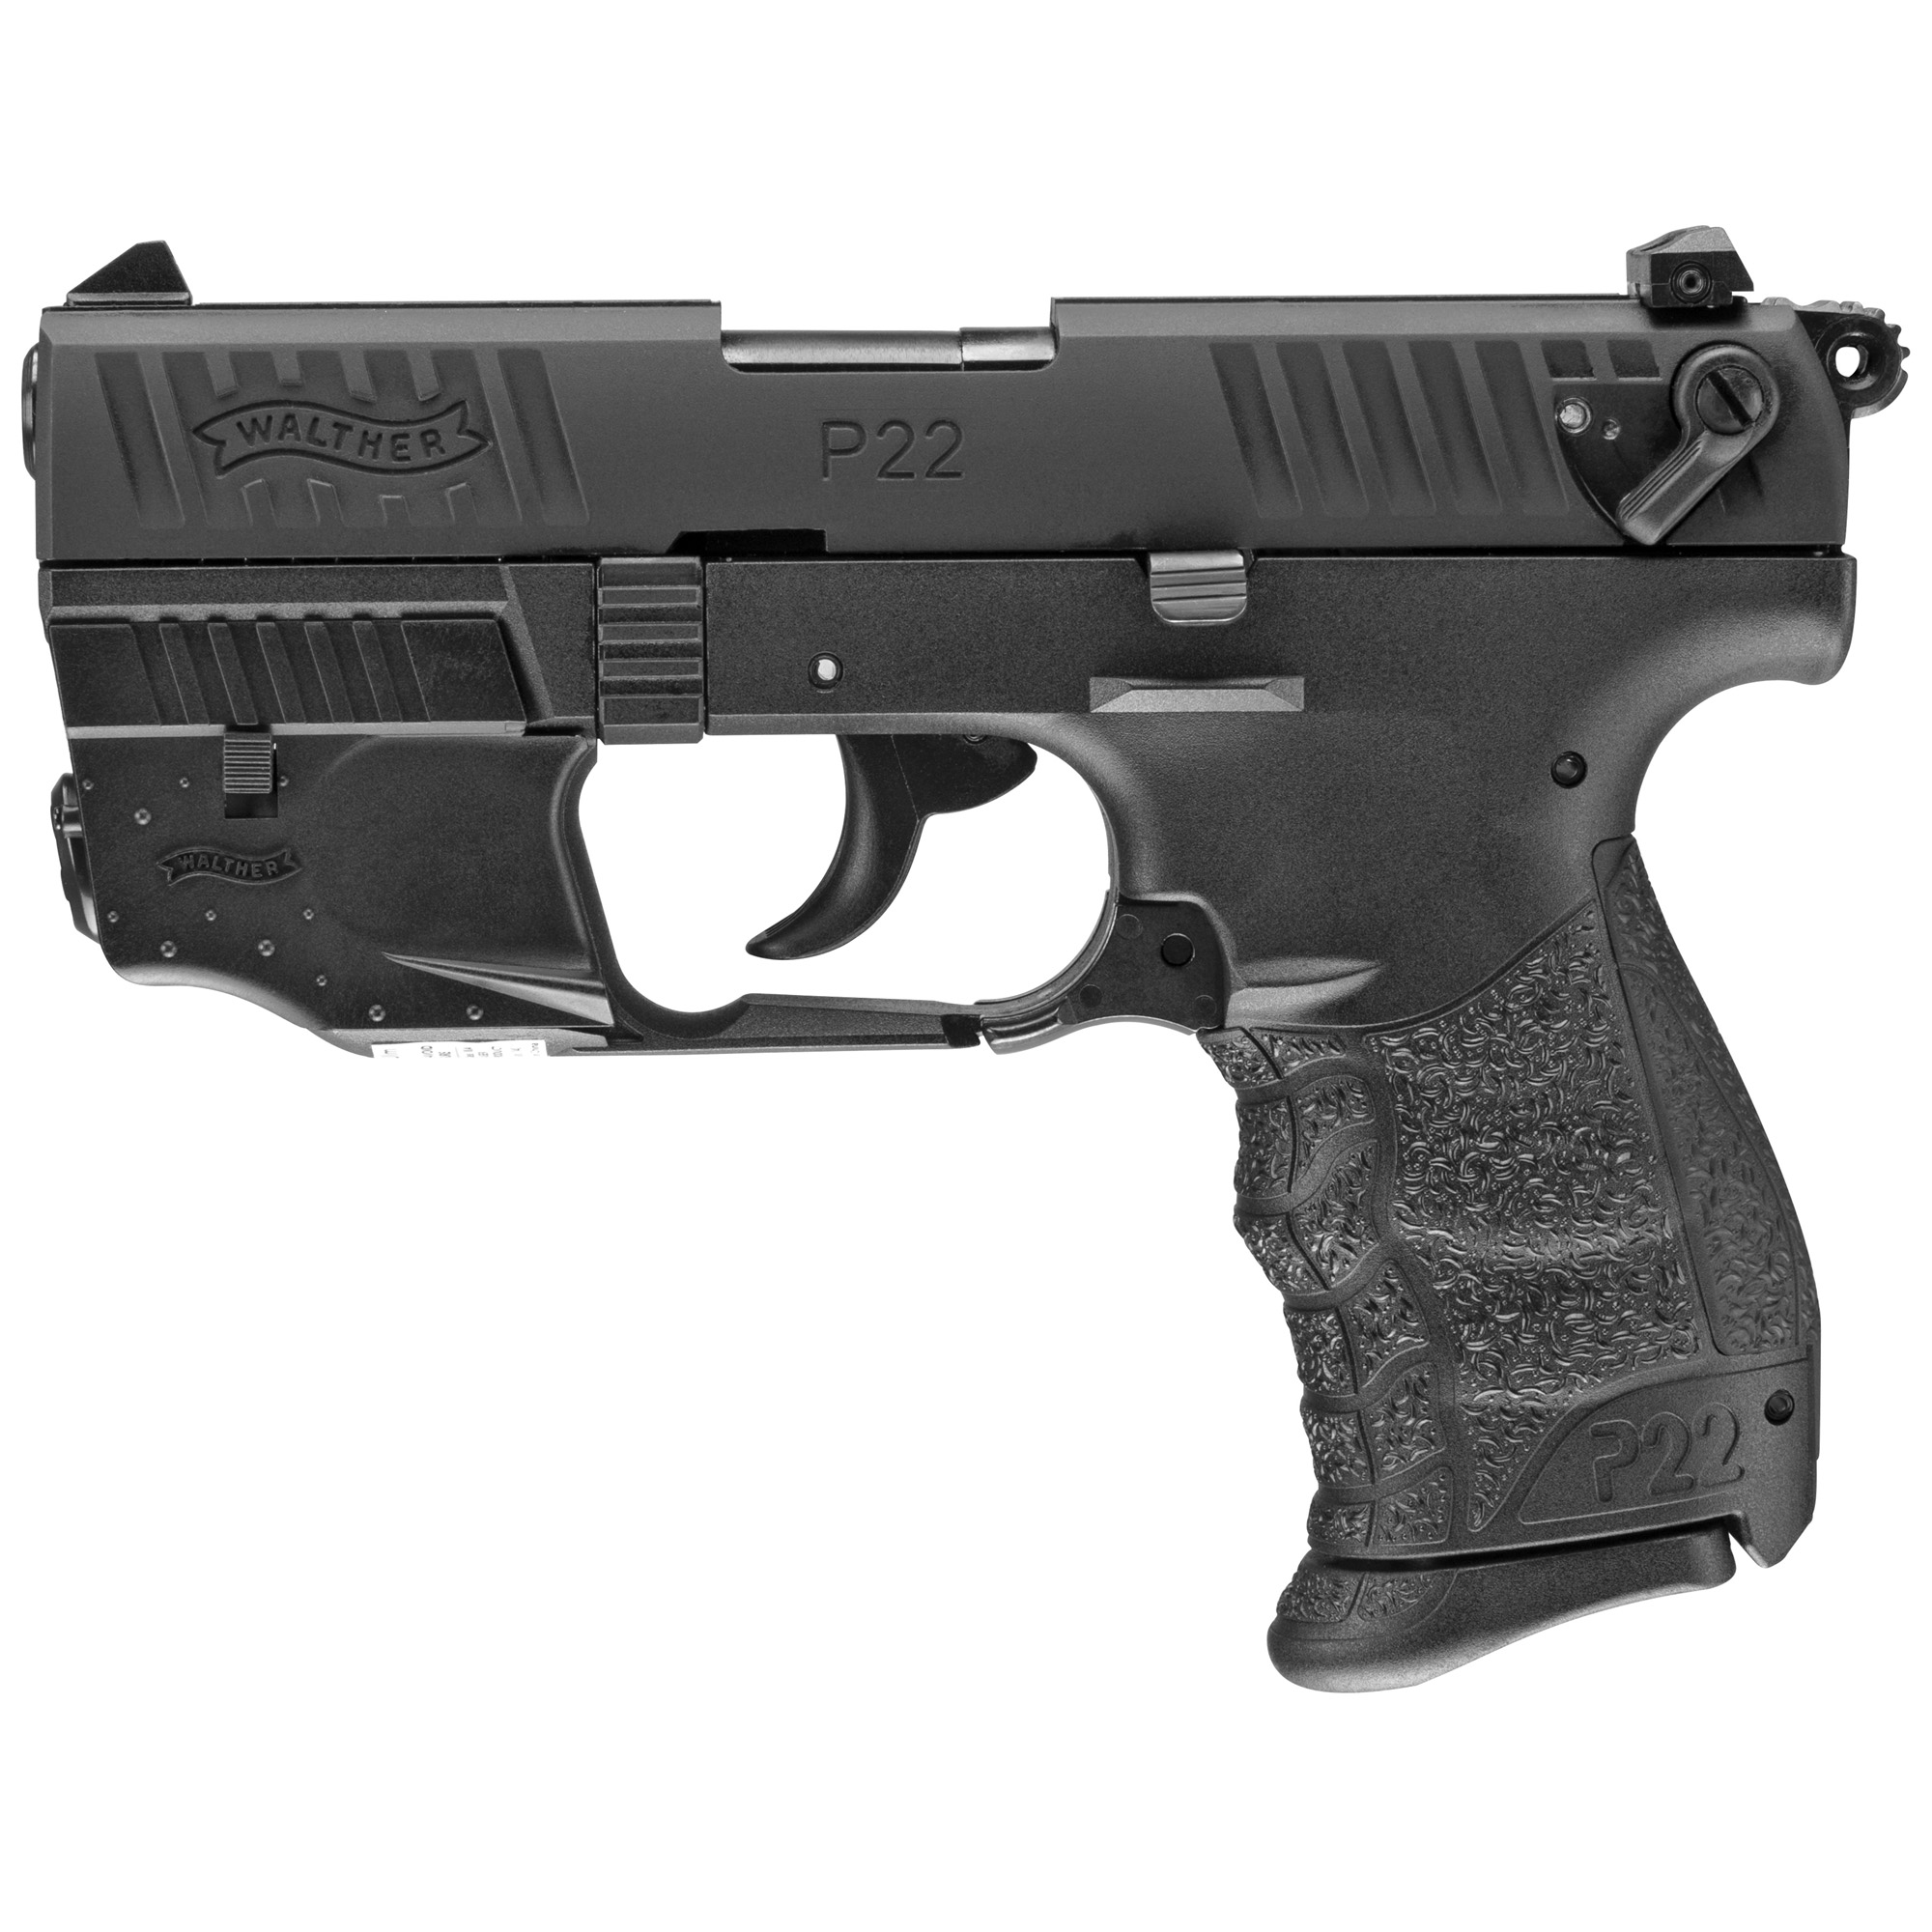 WALTHER P22Q 22LR 3.42 10RD BLK W/LASER